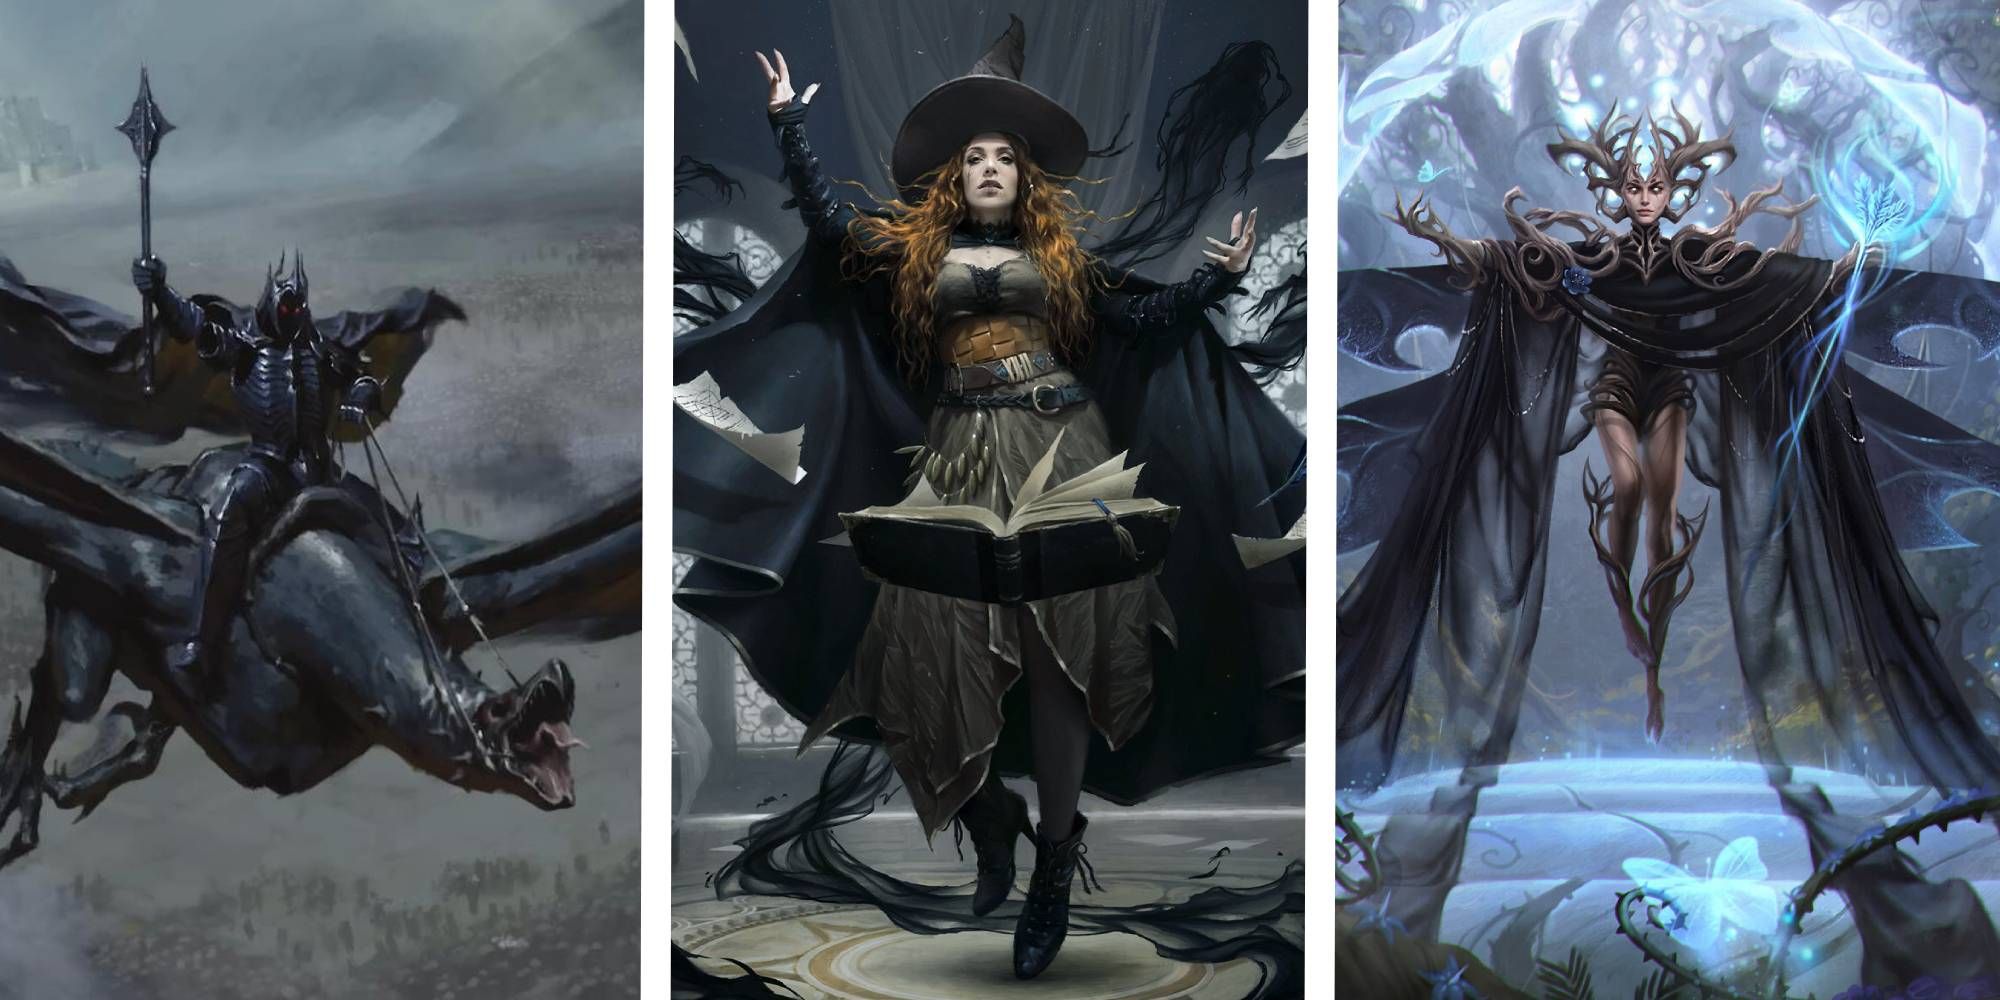 Best Dimir Commanders Lord of the Nazgul, Tasha, and Talion